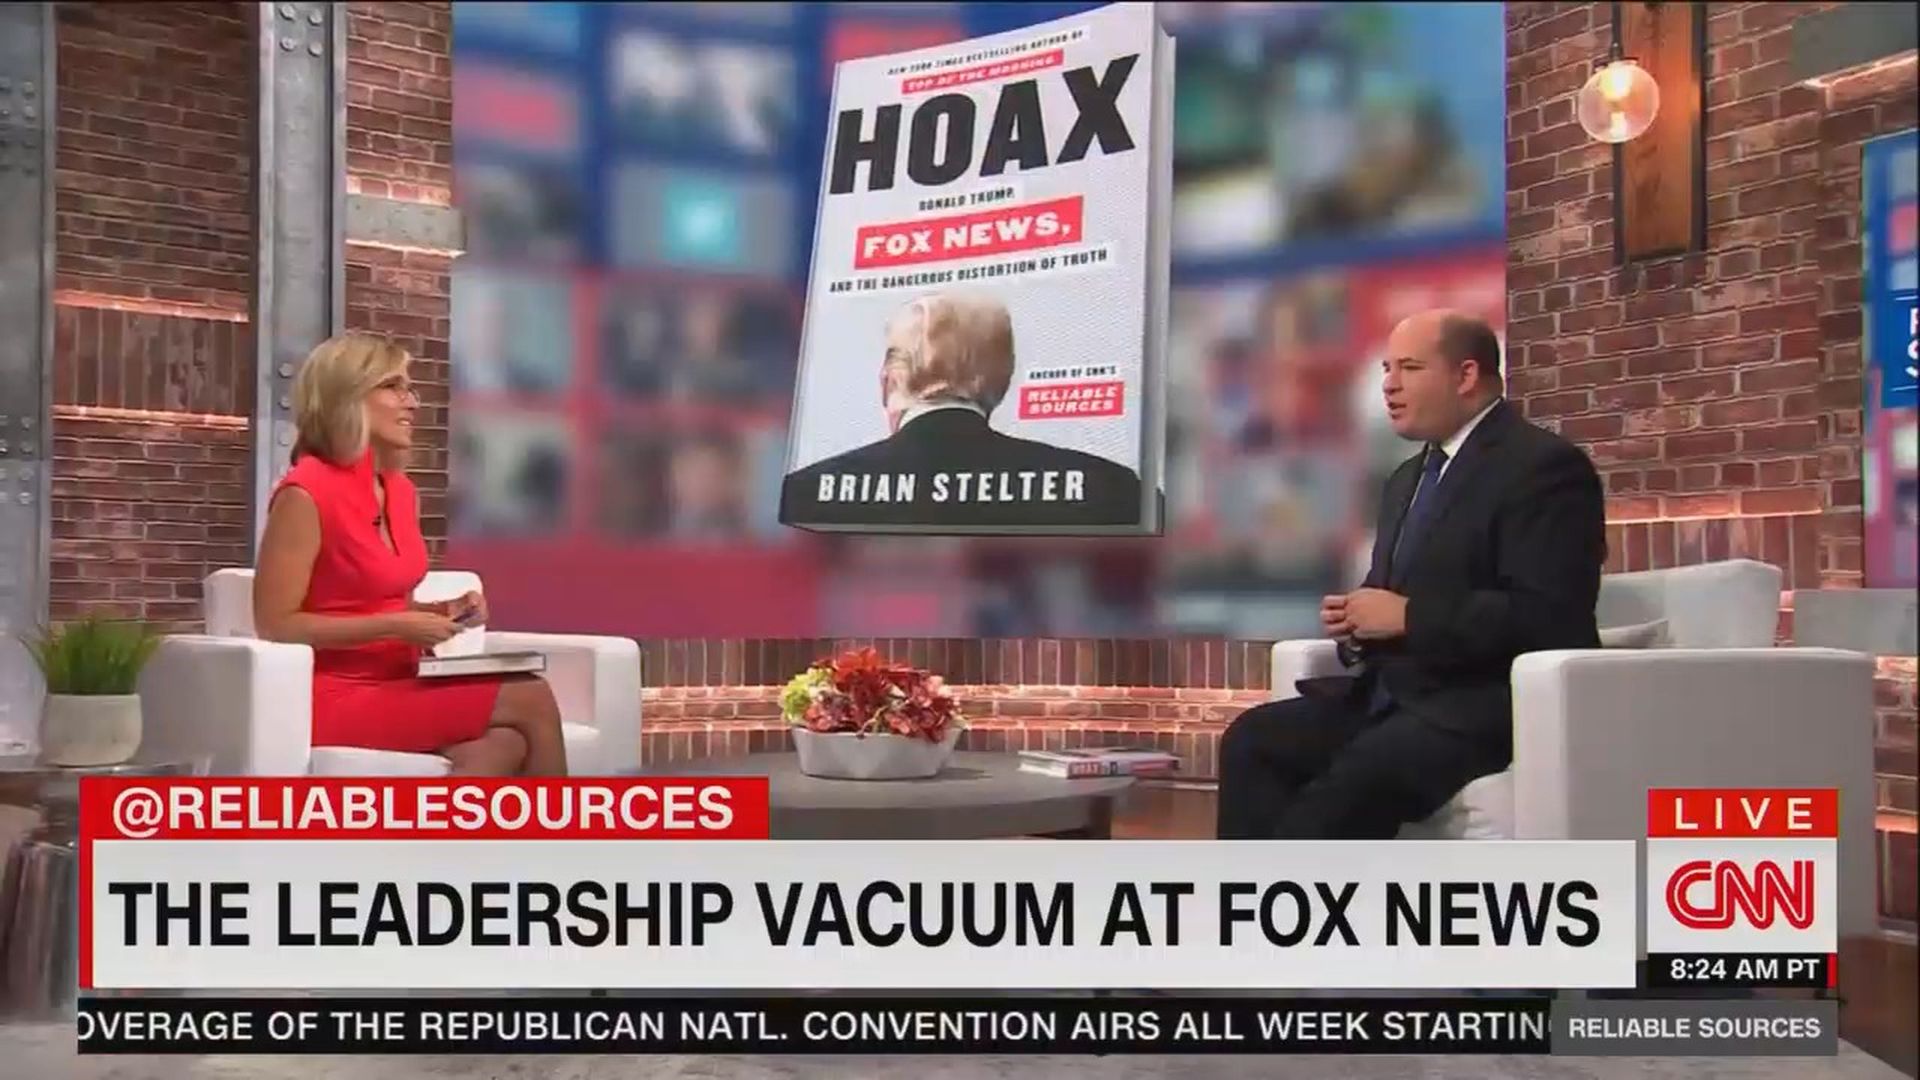 Brian Stelter's Fox News book "Hoax" sells out, with rush reprint - Axios